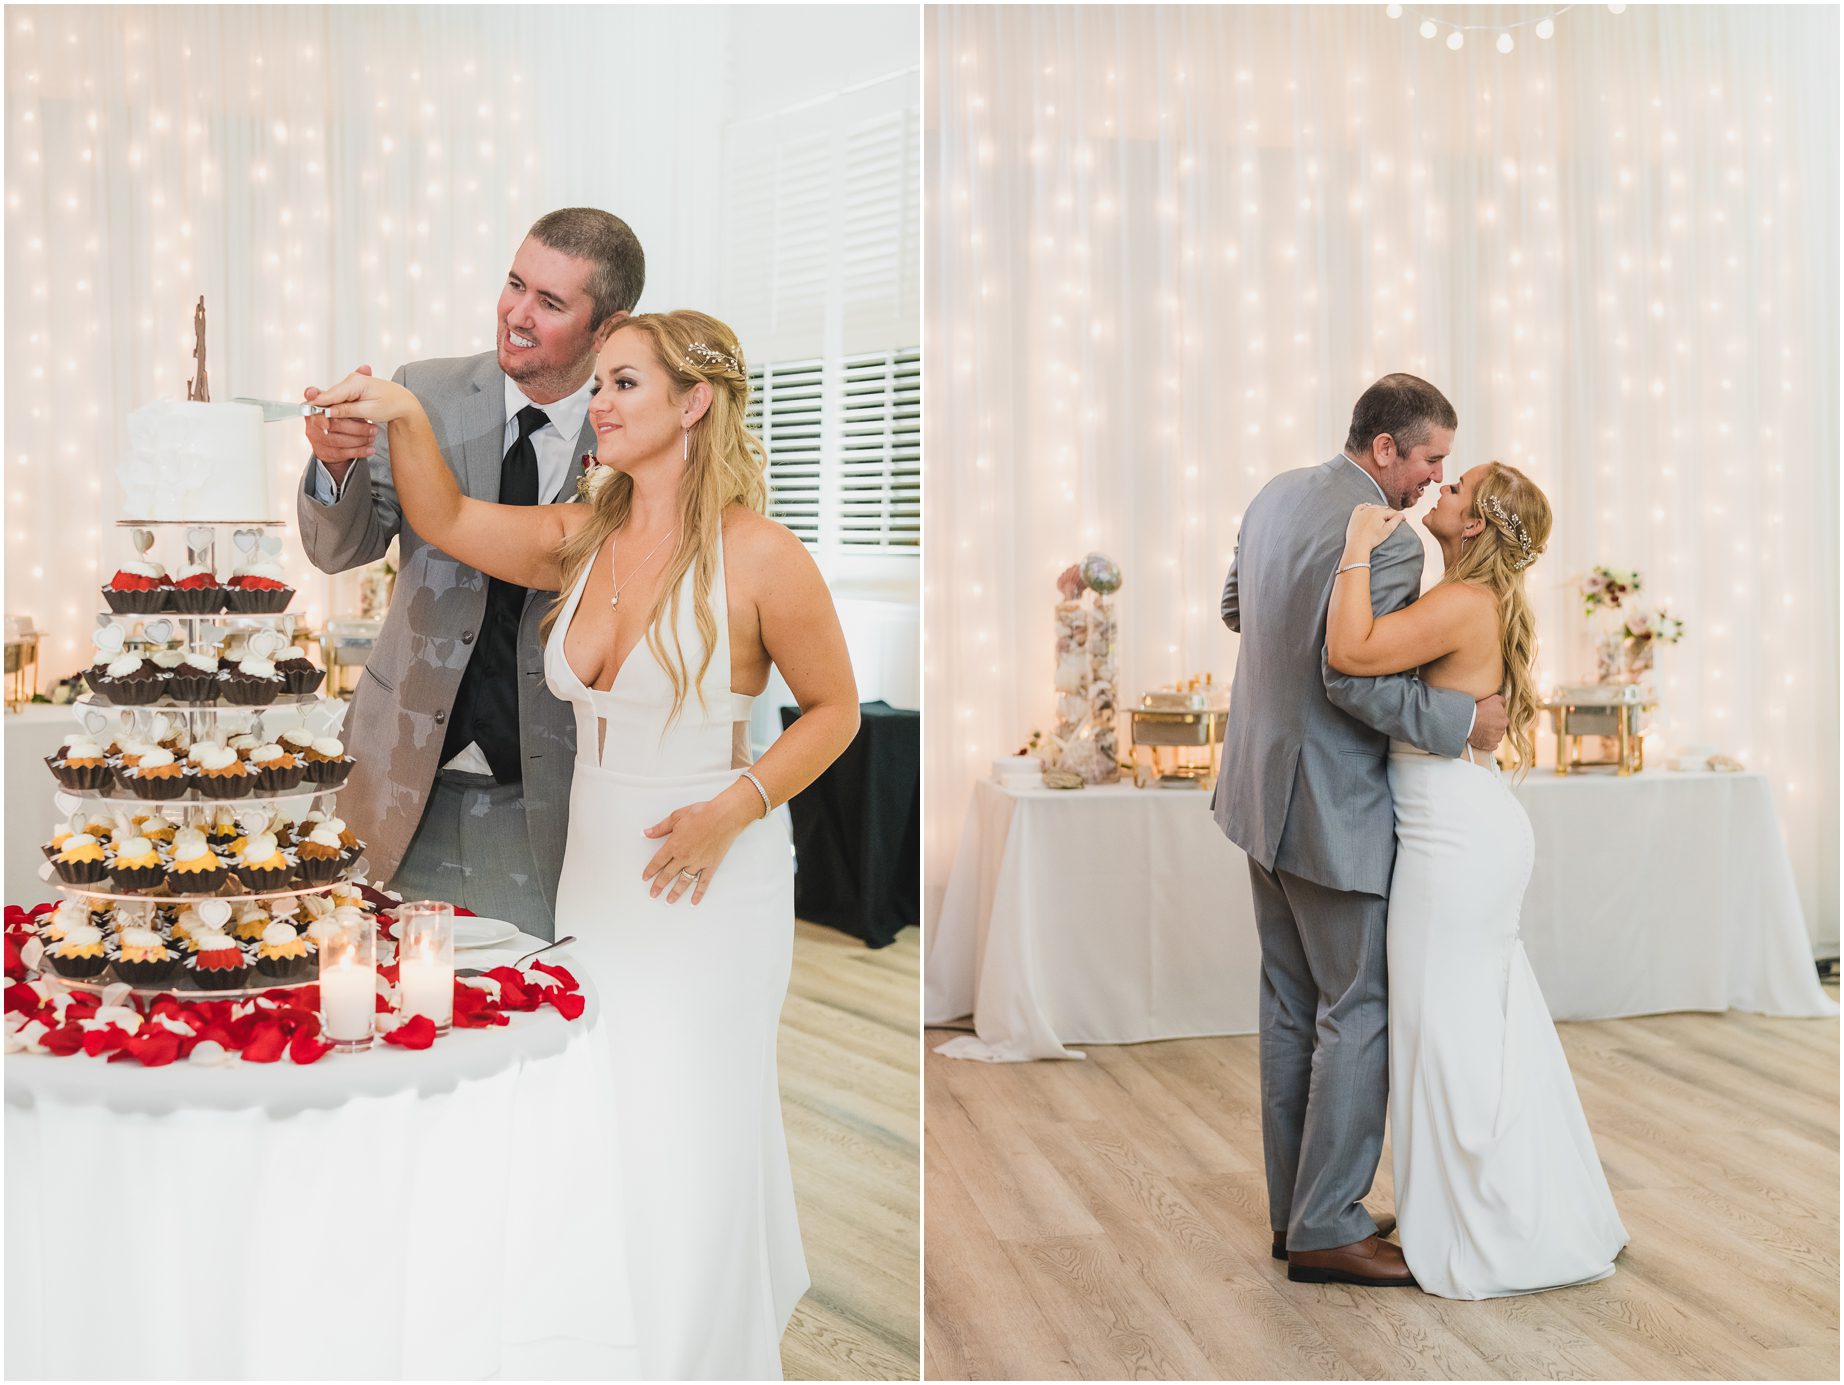 A bride and groom cut their cake and have their first dance, photographed by Malibu west beach club photographer, sun & Sparrow